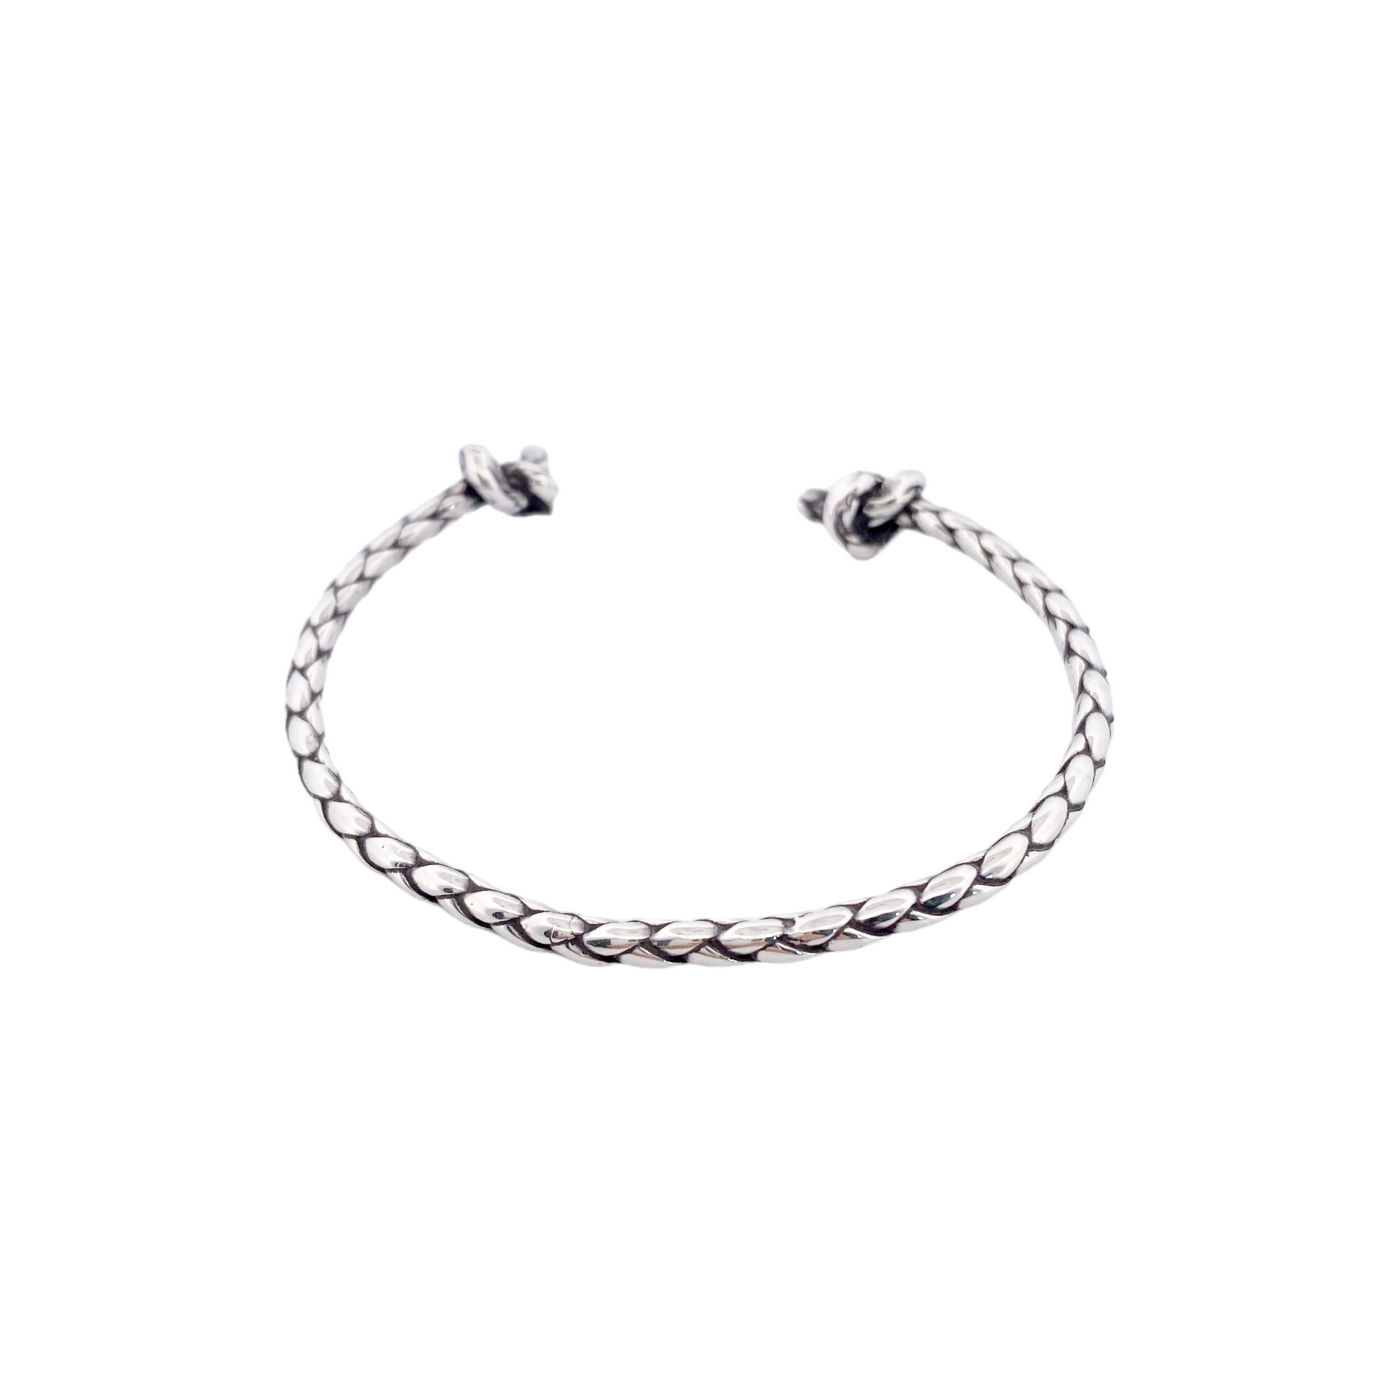 SILVER BANGLE WITH 2 KNOTS